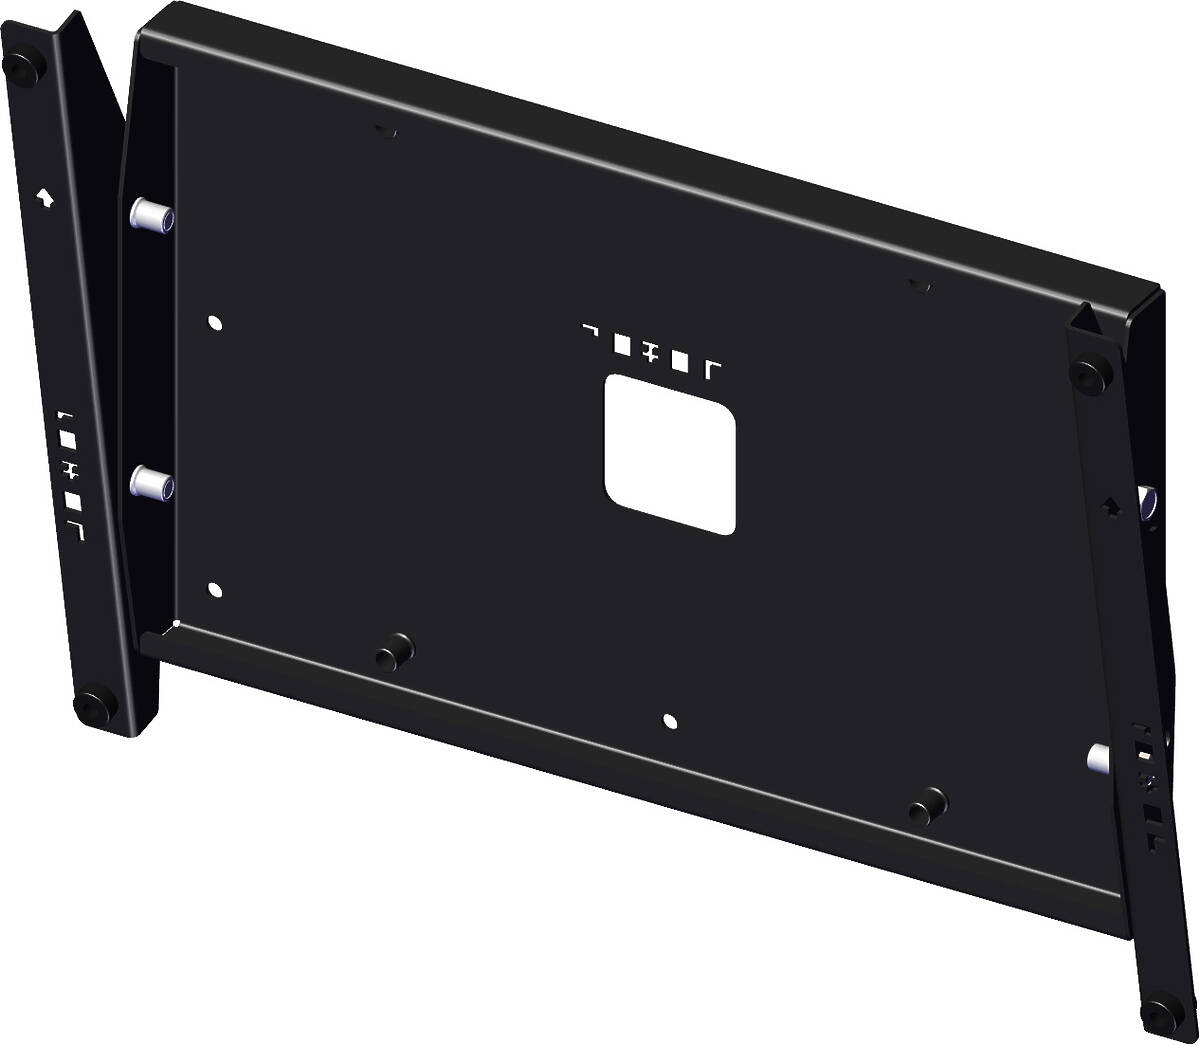 Unicol PLW3 Xactmatch bespoke LCD/LED monitor or commercial TV tilting wall mount for screens from 71-90" product image. Click to enlarge.